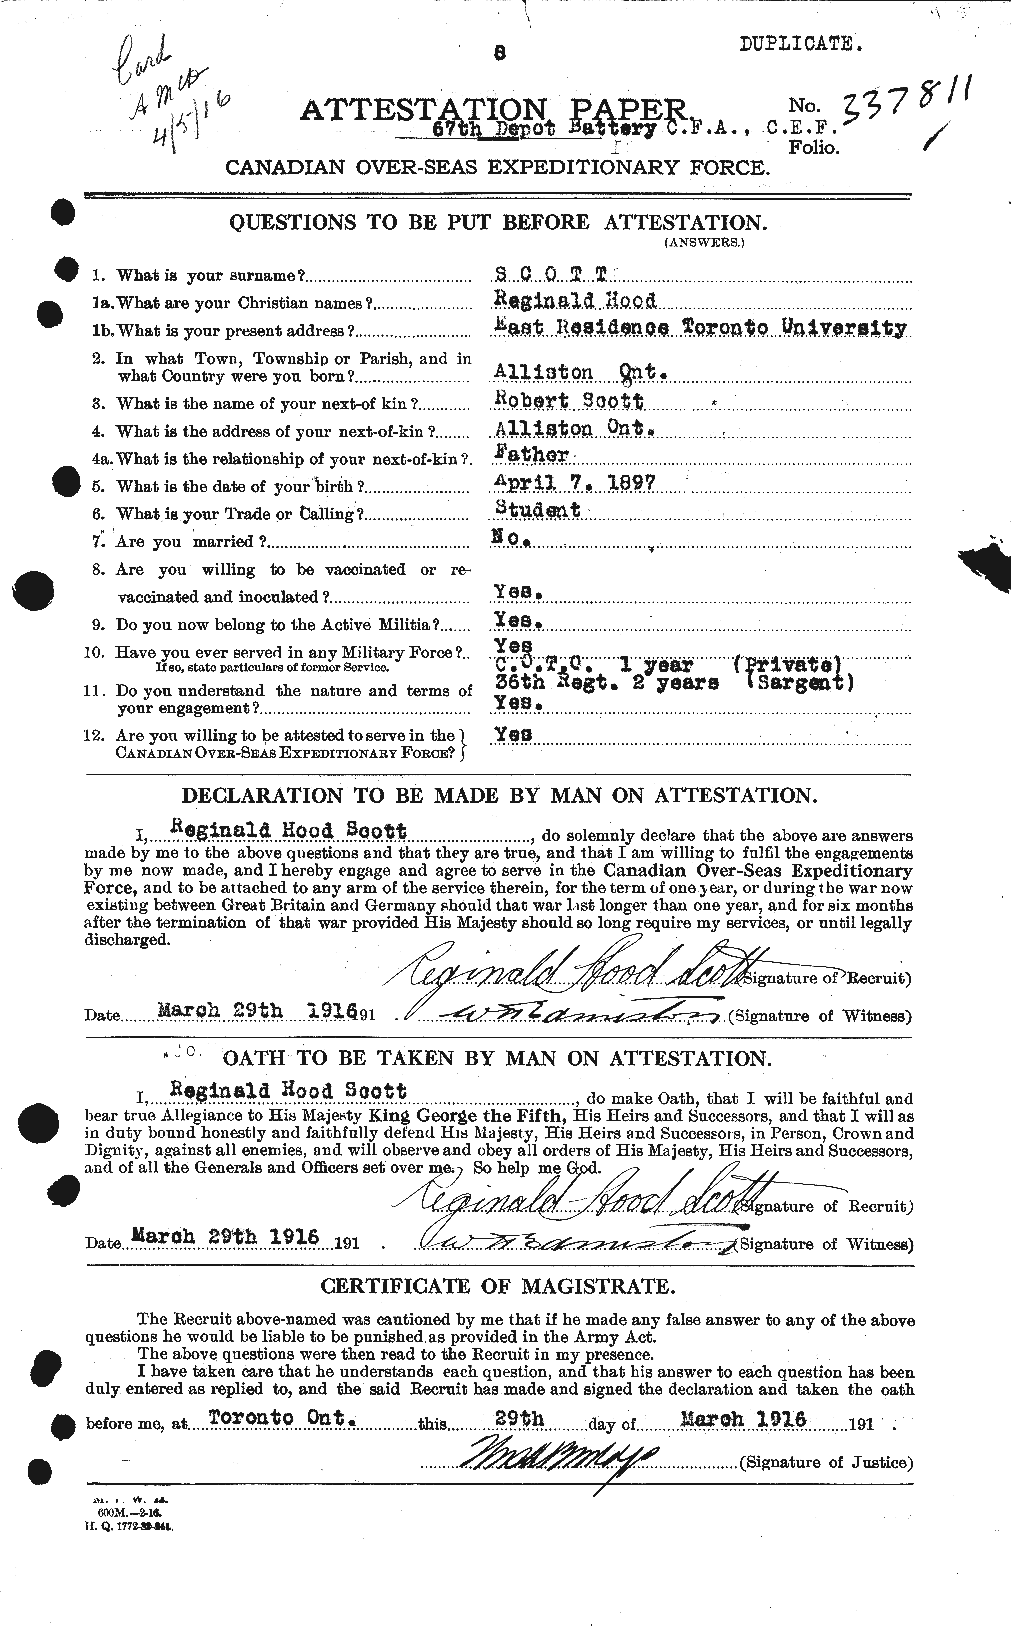 Personnel Records of the First World War - CEF 090194a